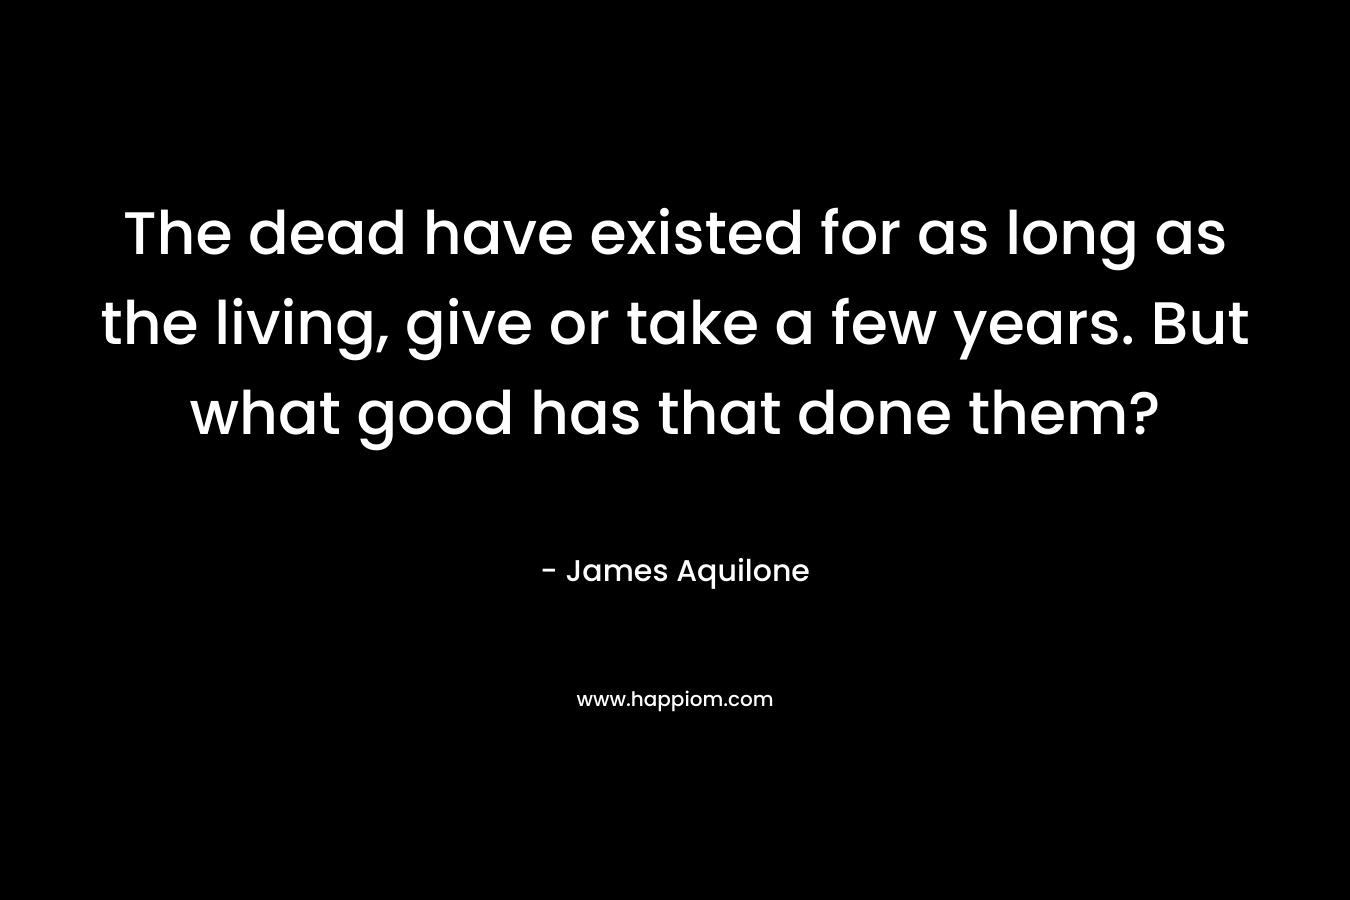 The dead have existed for as long as the living, give or take a few years. But what good has that done them? – James Aquilone